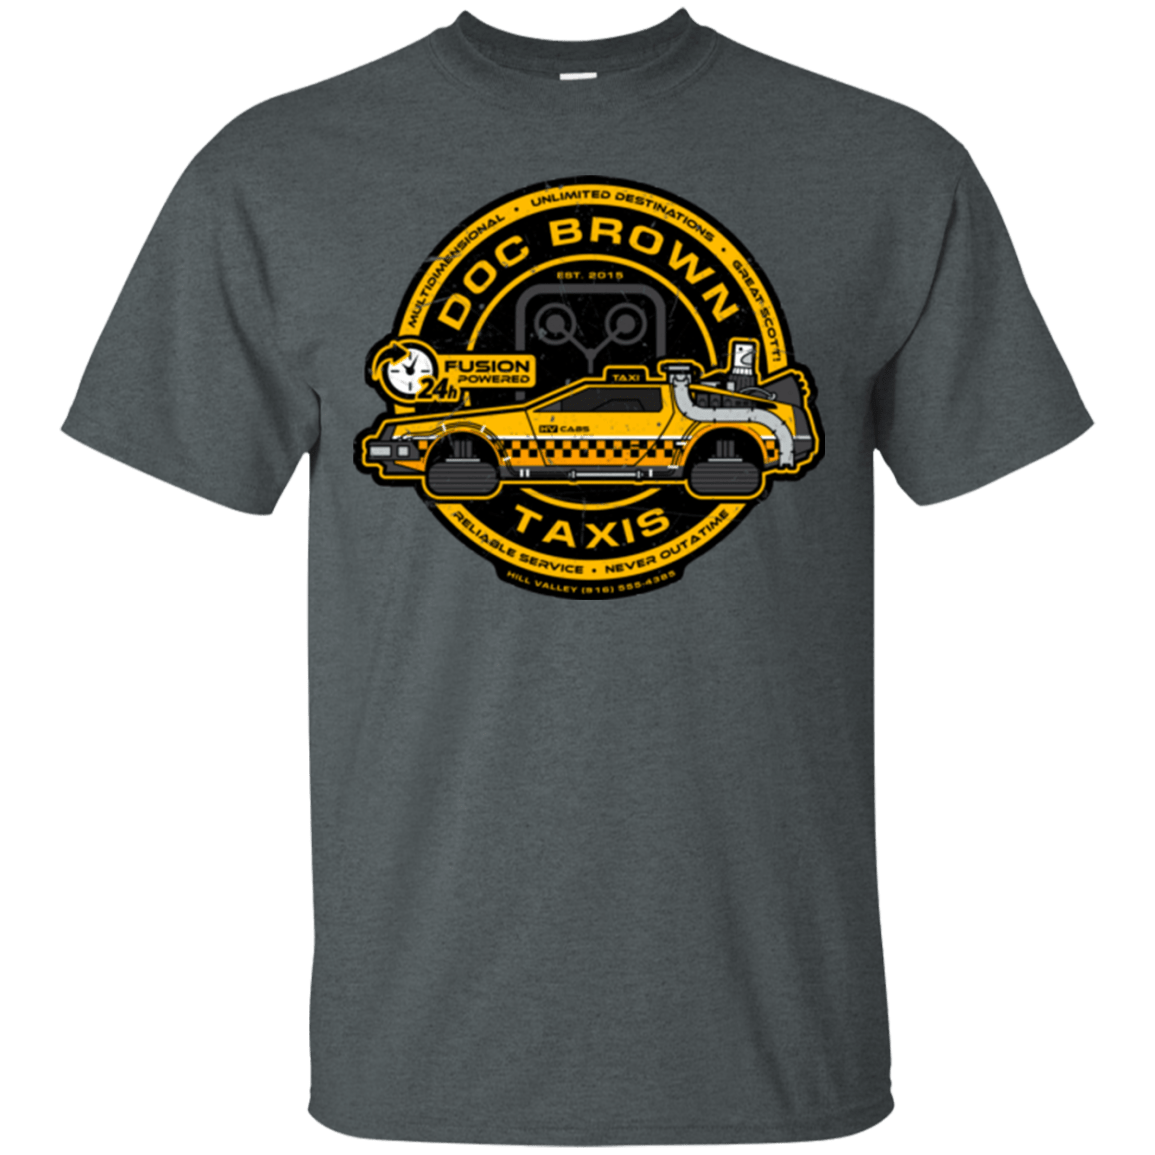 T-Shirts Dark Heather / Small Doc Brown Taxis T-Shirt